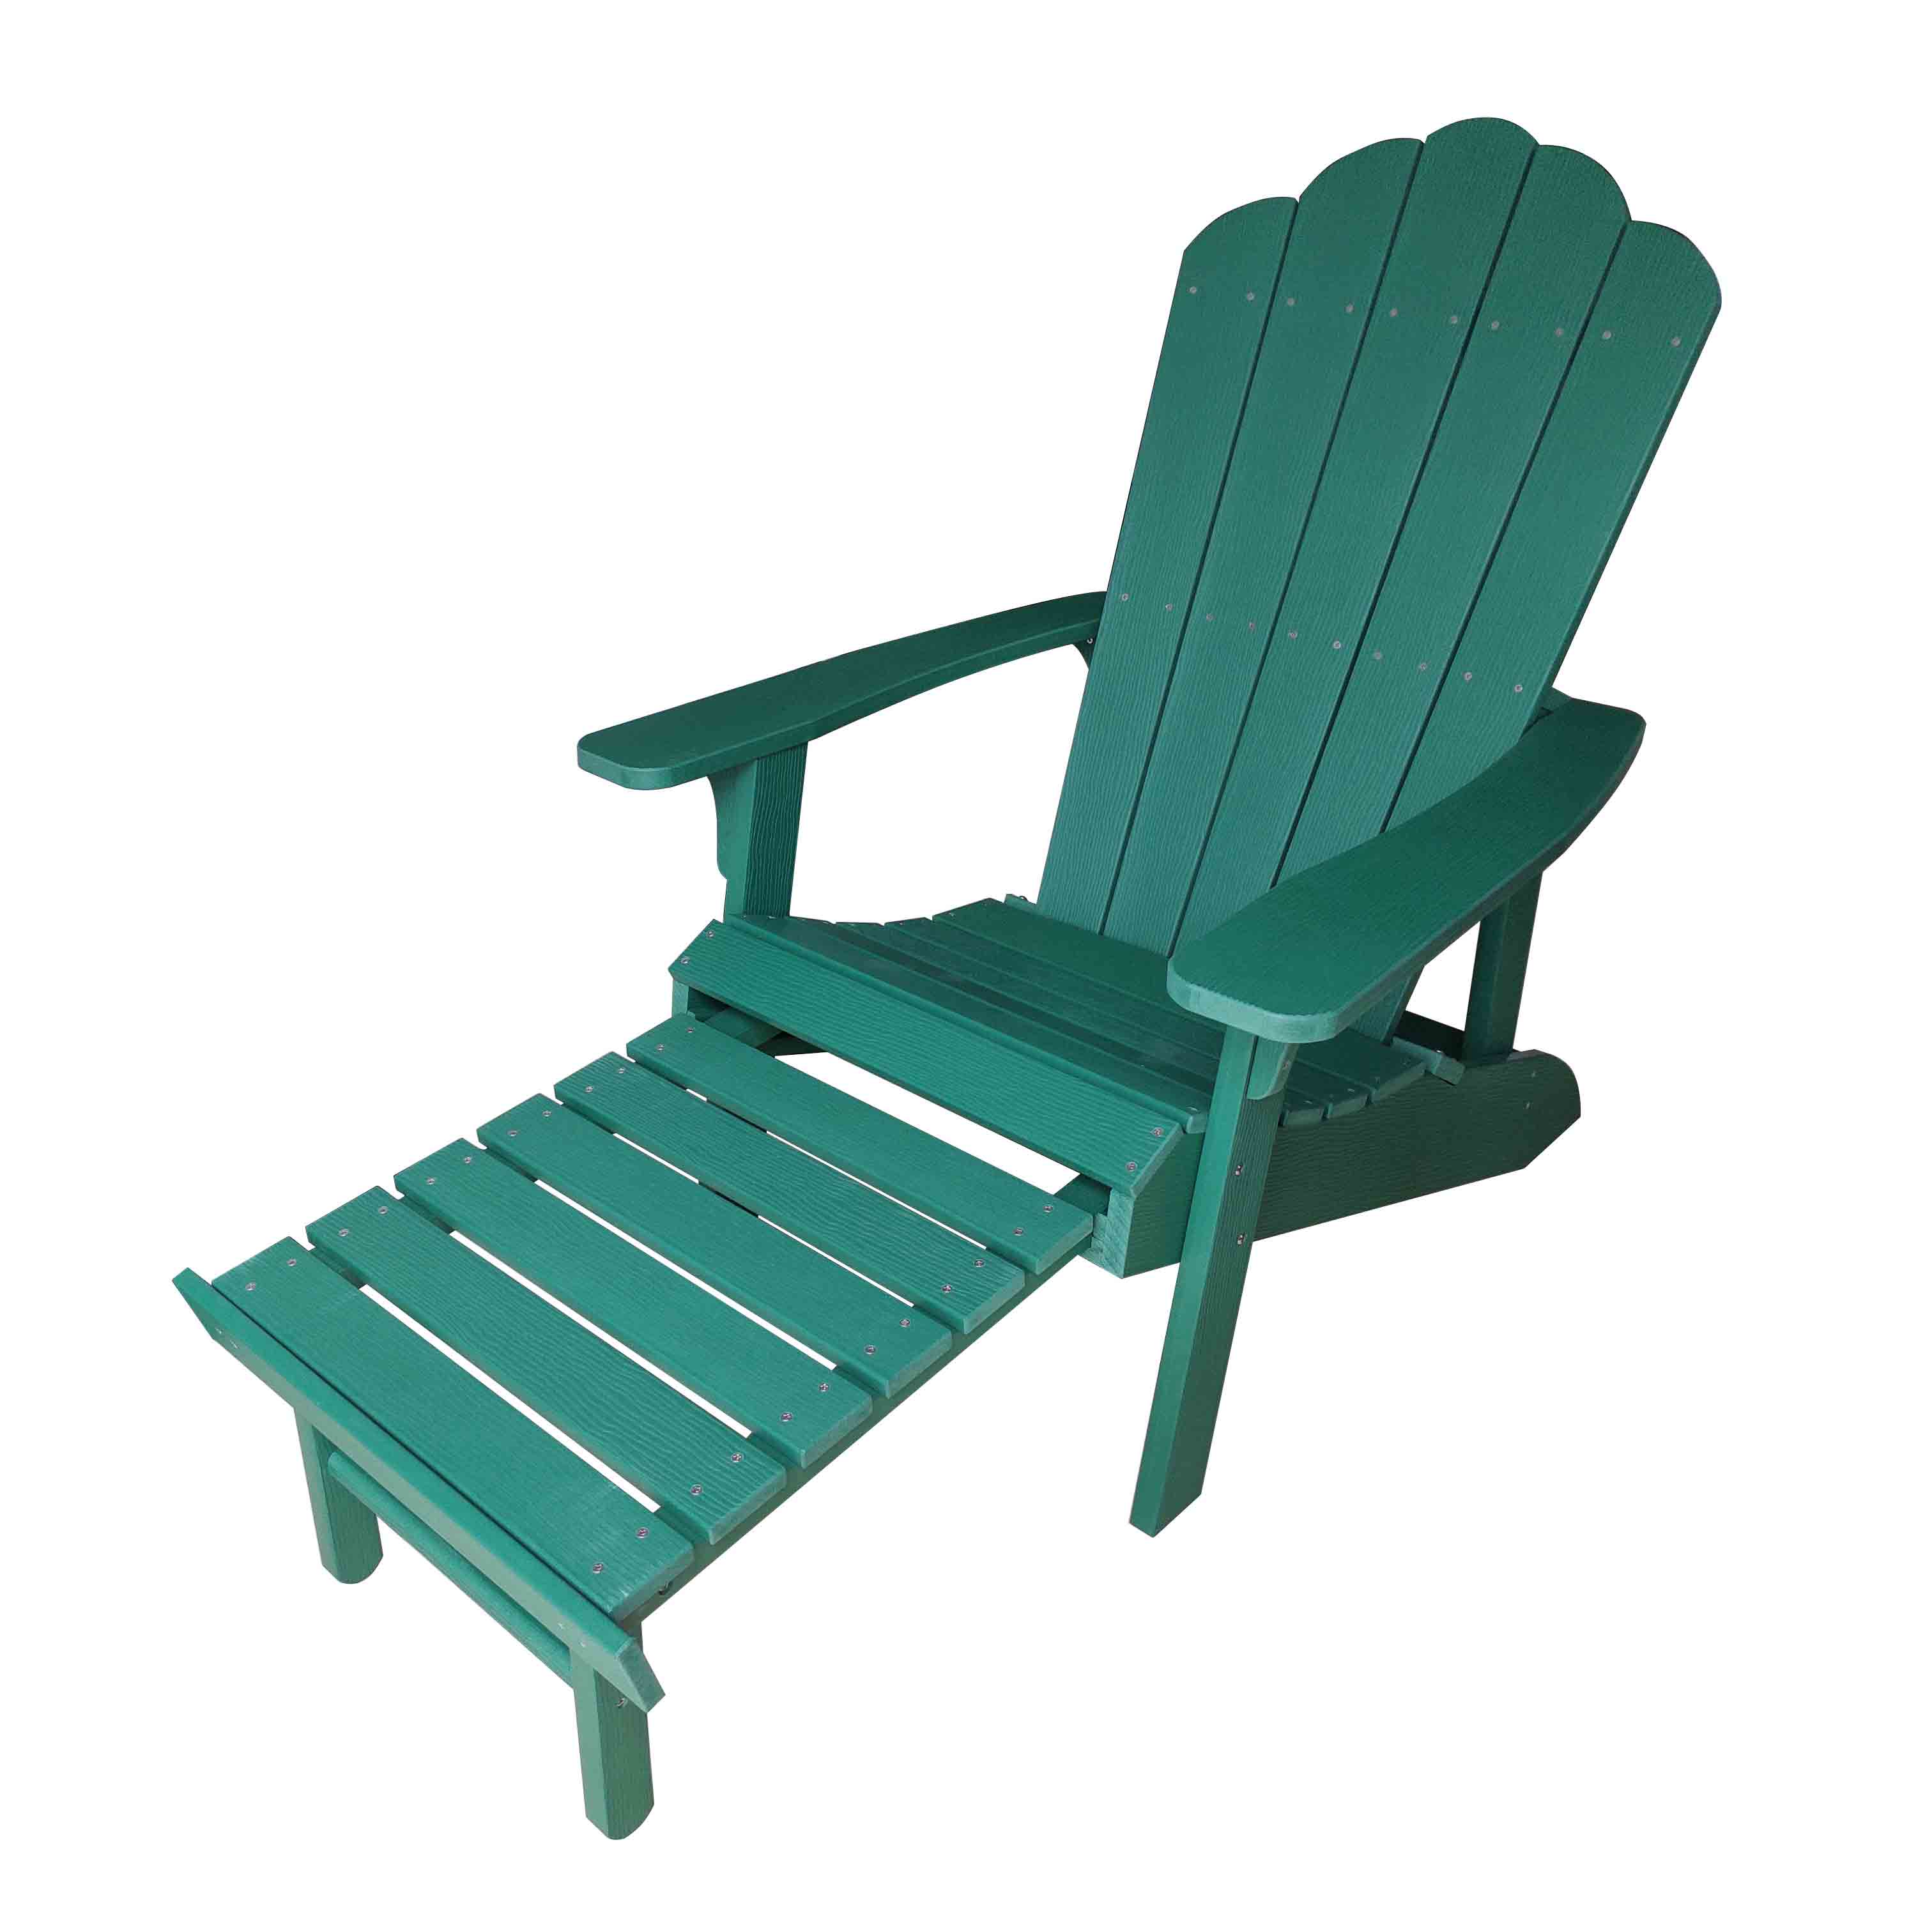 JJC14505 PS wood Adirondack chair with footrest Featured Image